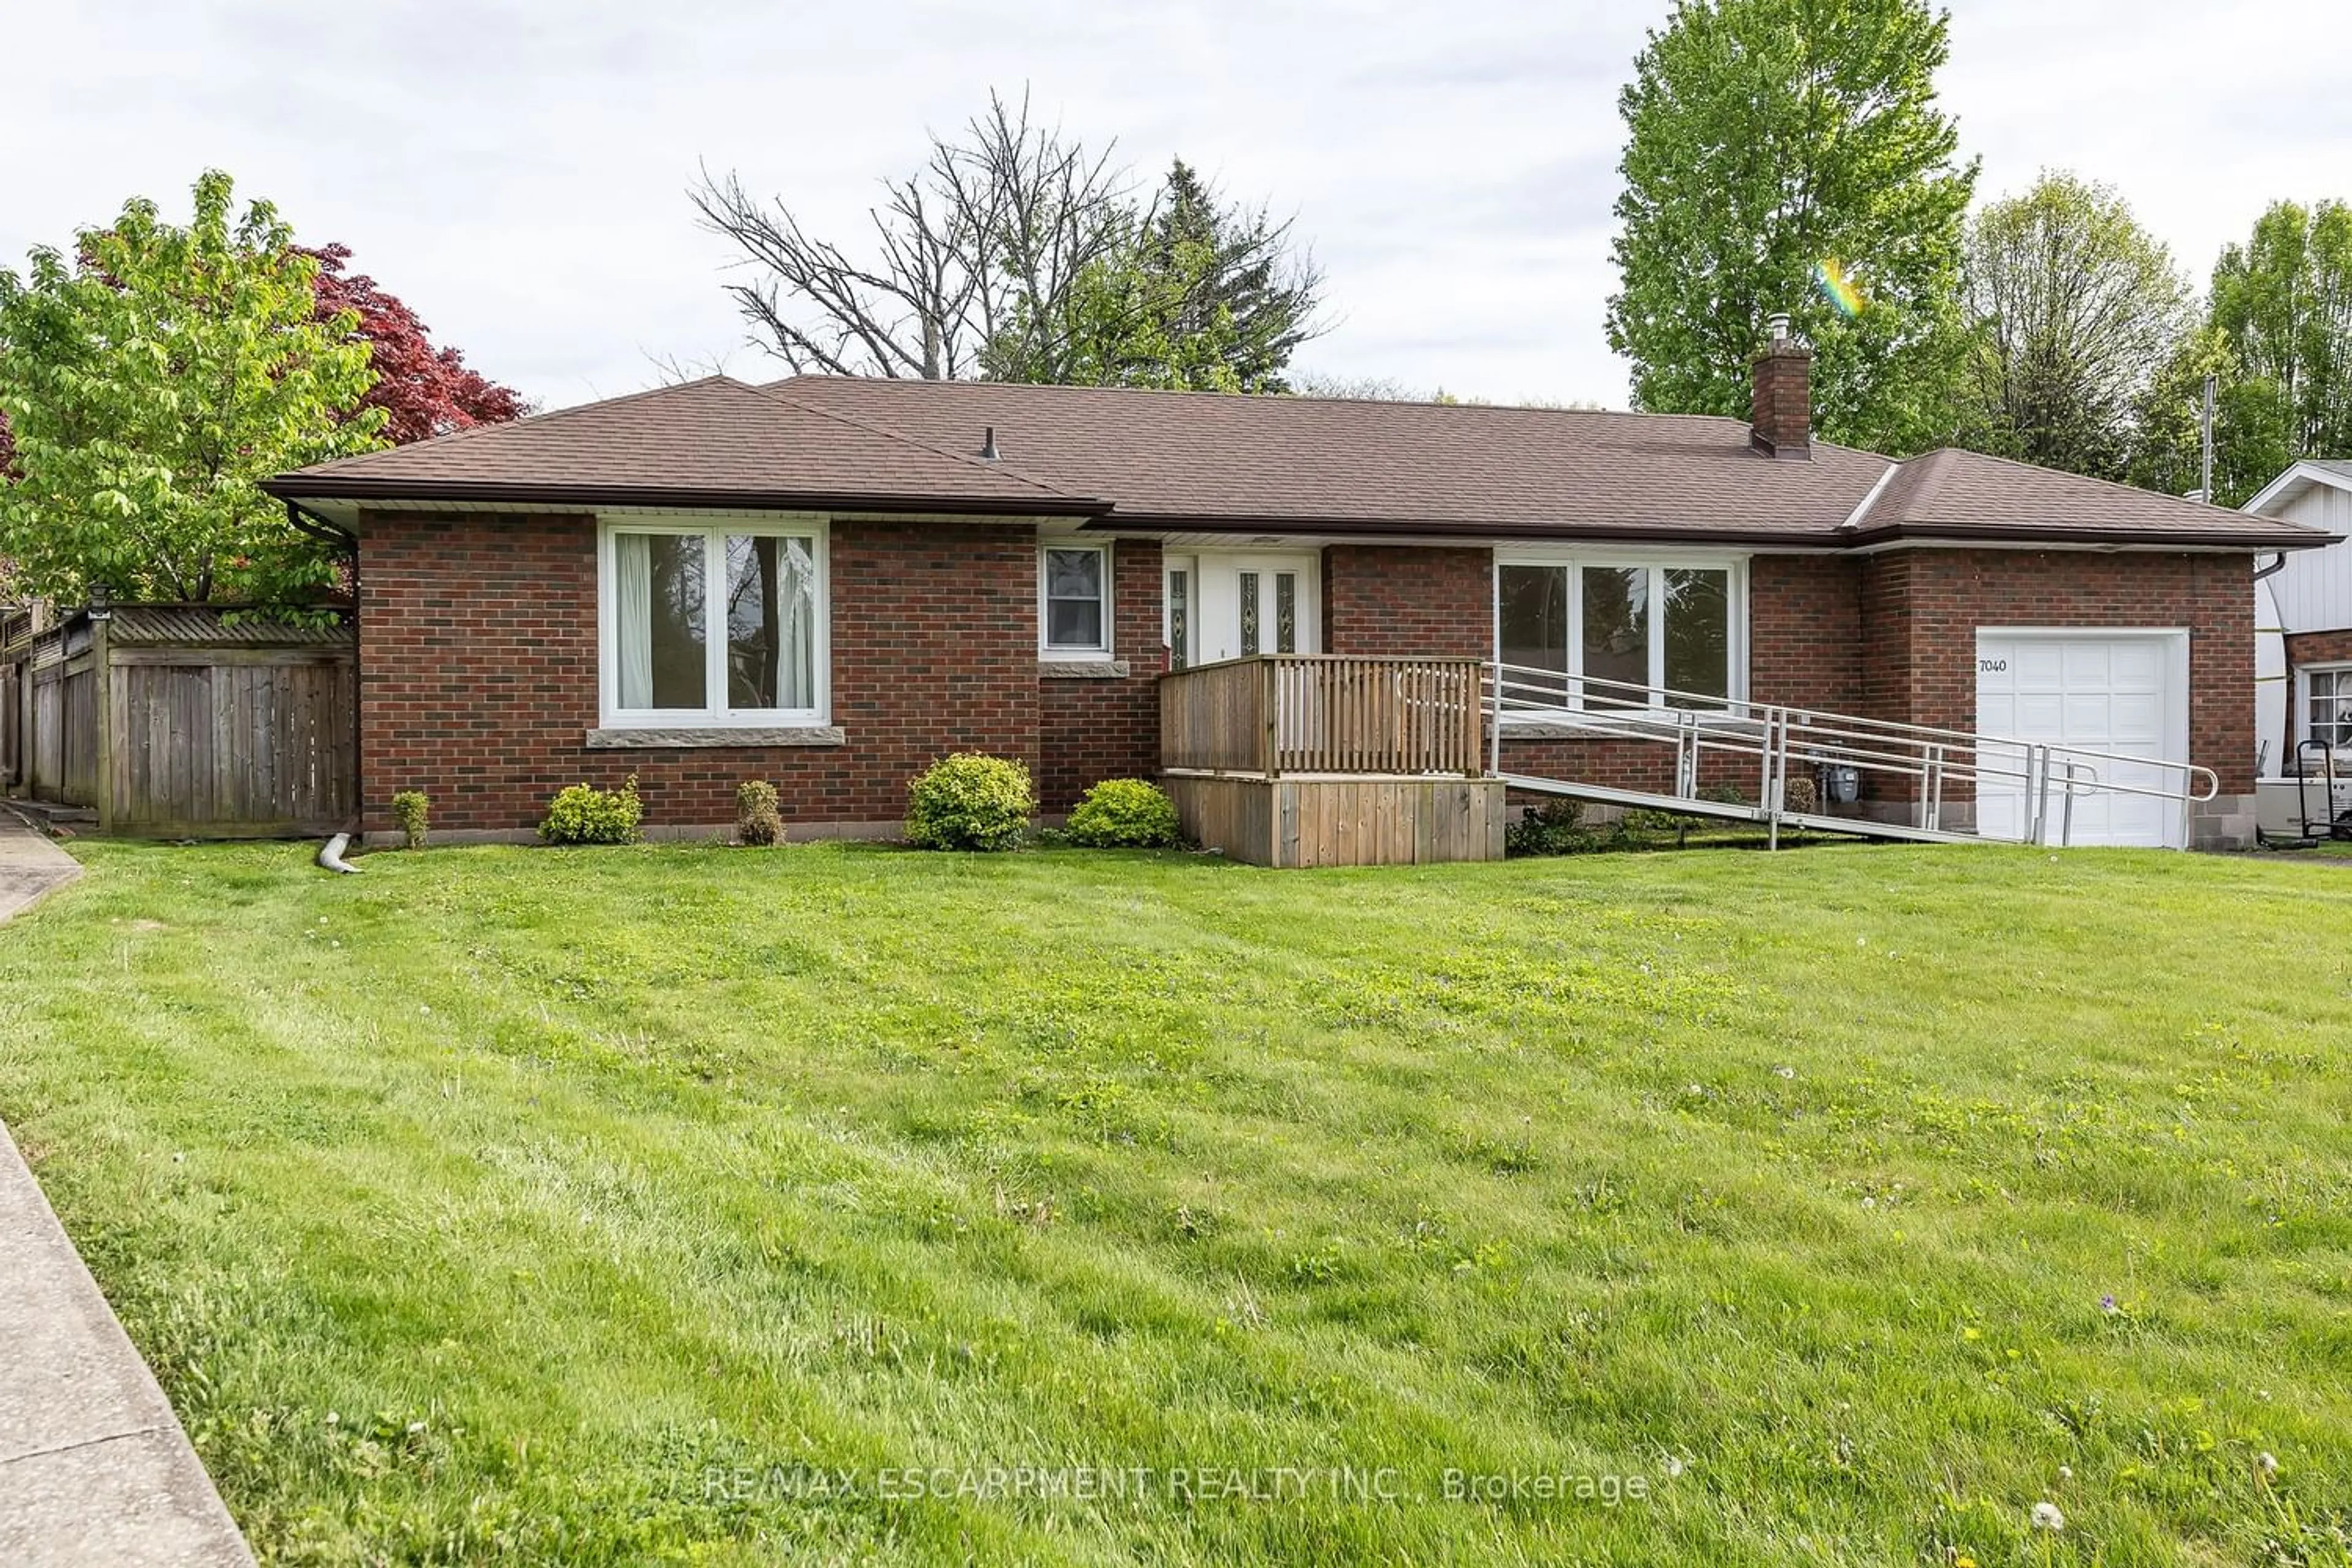 Home with brick exterior material for 7040 Brookfield Ave, Niagara Falls Ontario L2G 5R8